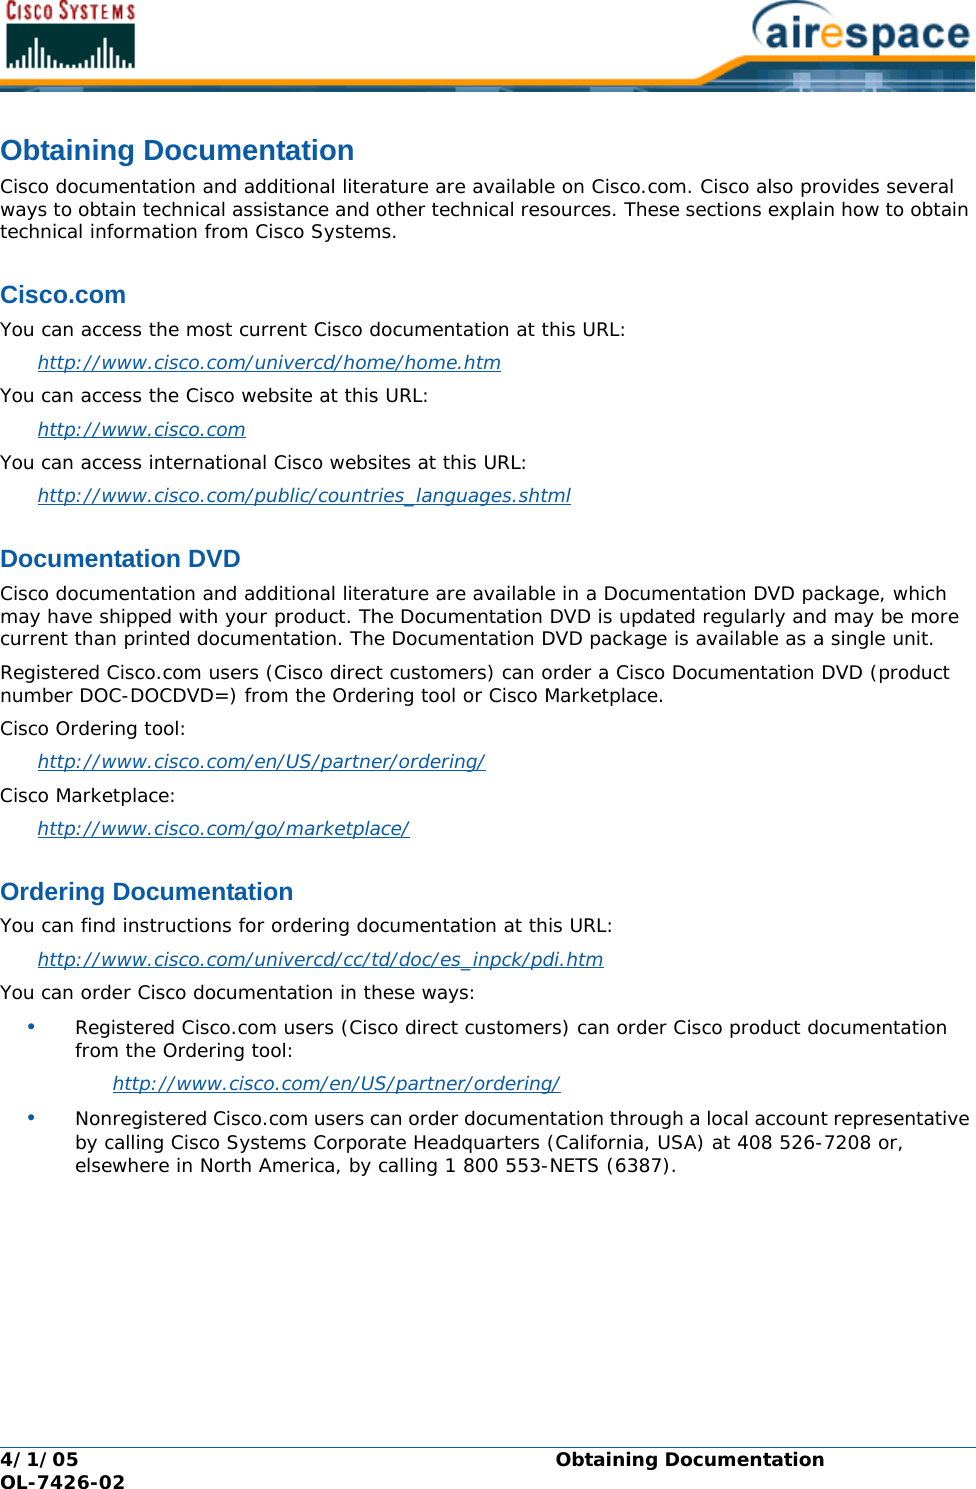 4/1/05 Obtaining Documentation  OL-7426-02Obtaining DocumentationObtaining DocumentationCisco documentation and additional literature are available on Cisco.com. Cisco also provides several ways to obtain technical assistance and other technical resources. These sections explain how to obtain technical information from Cisco Systems.Cisco.comCisco.comYou can access the most current Cisco documentation at this URL:http://www.cisco.com/univercd/home/home.htm You can access the Cisco website at this URL:http://www.cisco.com You can access international Cisco websites at this URL:http://www.cisco.com/public/countries_languages.shtml Documentation DVDDocumentation DVDCisco documentation and additional literature are available in a Documentation DVD package, which may have shipped with your product. The Documentation DVD is updated regularly and may be more current than printed documentation. The Documentation DVD package is available as a single unit. Registered Cisco.com users (Cisco direct customers) can order a Cisco Documentation DVD (product number DOC-DOCDVD=) from the Ordering tool or Cisco Marketplace.Cisco Ordering tool:http://www.cisco.com/en/US/partner/ordering/ Cisco Marketplace:http://www.cisco.com/go/marketplace/ Ordering DocumentationOrdering DocumentationYou can find instructions for ordering documentation at this URL:http://www.cisco.com/univercd/cc/td/doc/es_inpck/pdi.htm You can order Cisco documentation in these ways:•Registered Cisco.com users (Cisco direct customers) can order Cisco product documentation from the Ordering tool:http://www.cisco.com/en/US/partner/ordering/ •Nonregistered Cisco.com users can order documentation through a local account representative by calling Cisco Systems Corporate Headquarters (California, USA) at 408 526-7208 or, elsewhere in North America, by calling 1 800 553-NETS (6387).